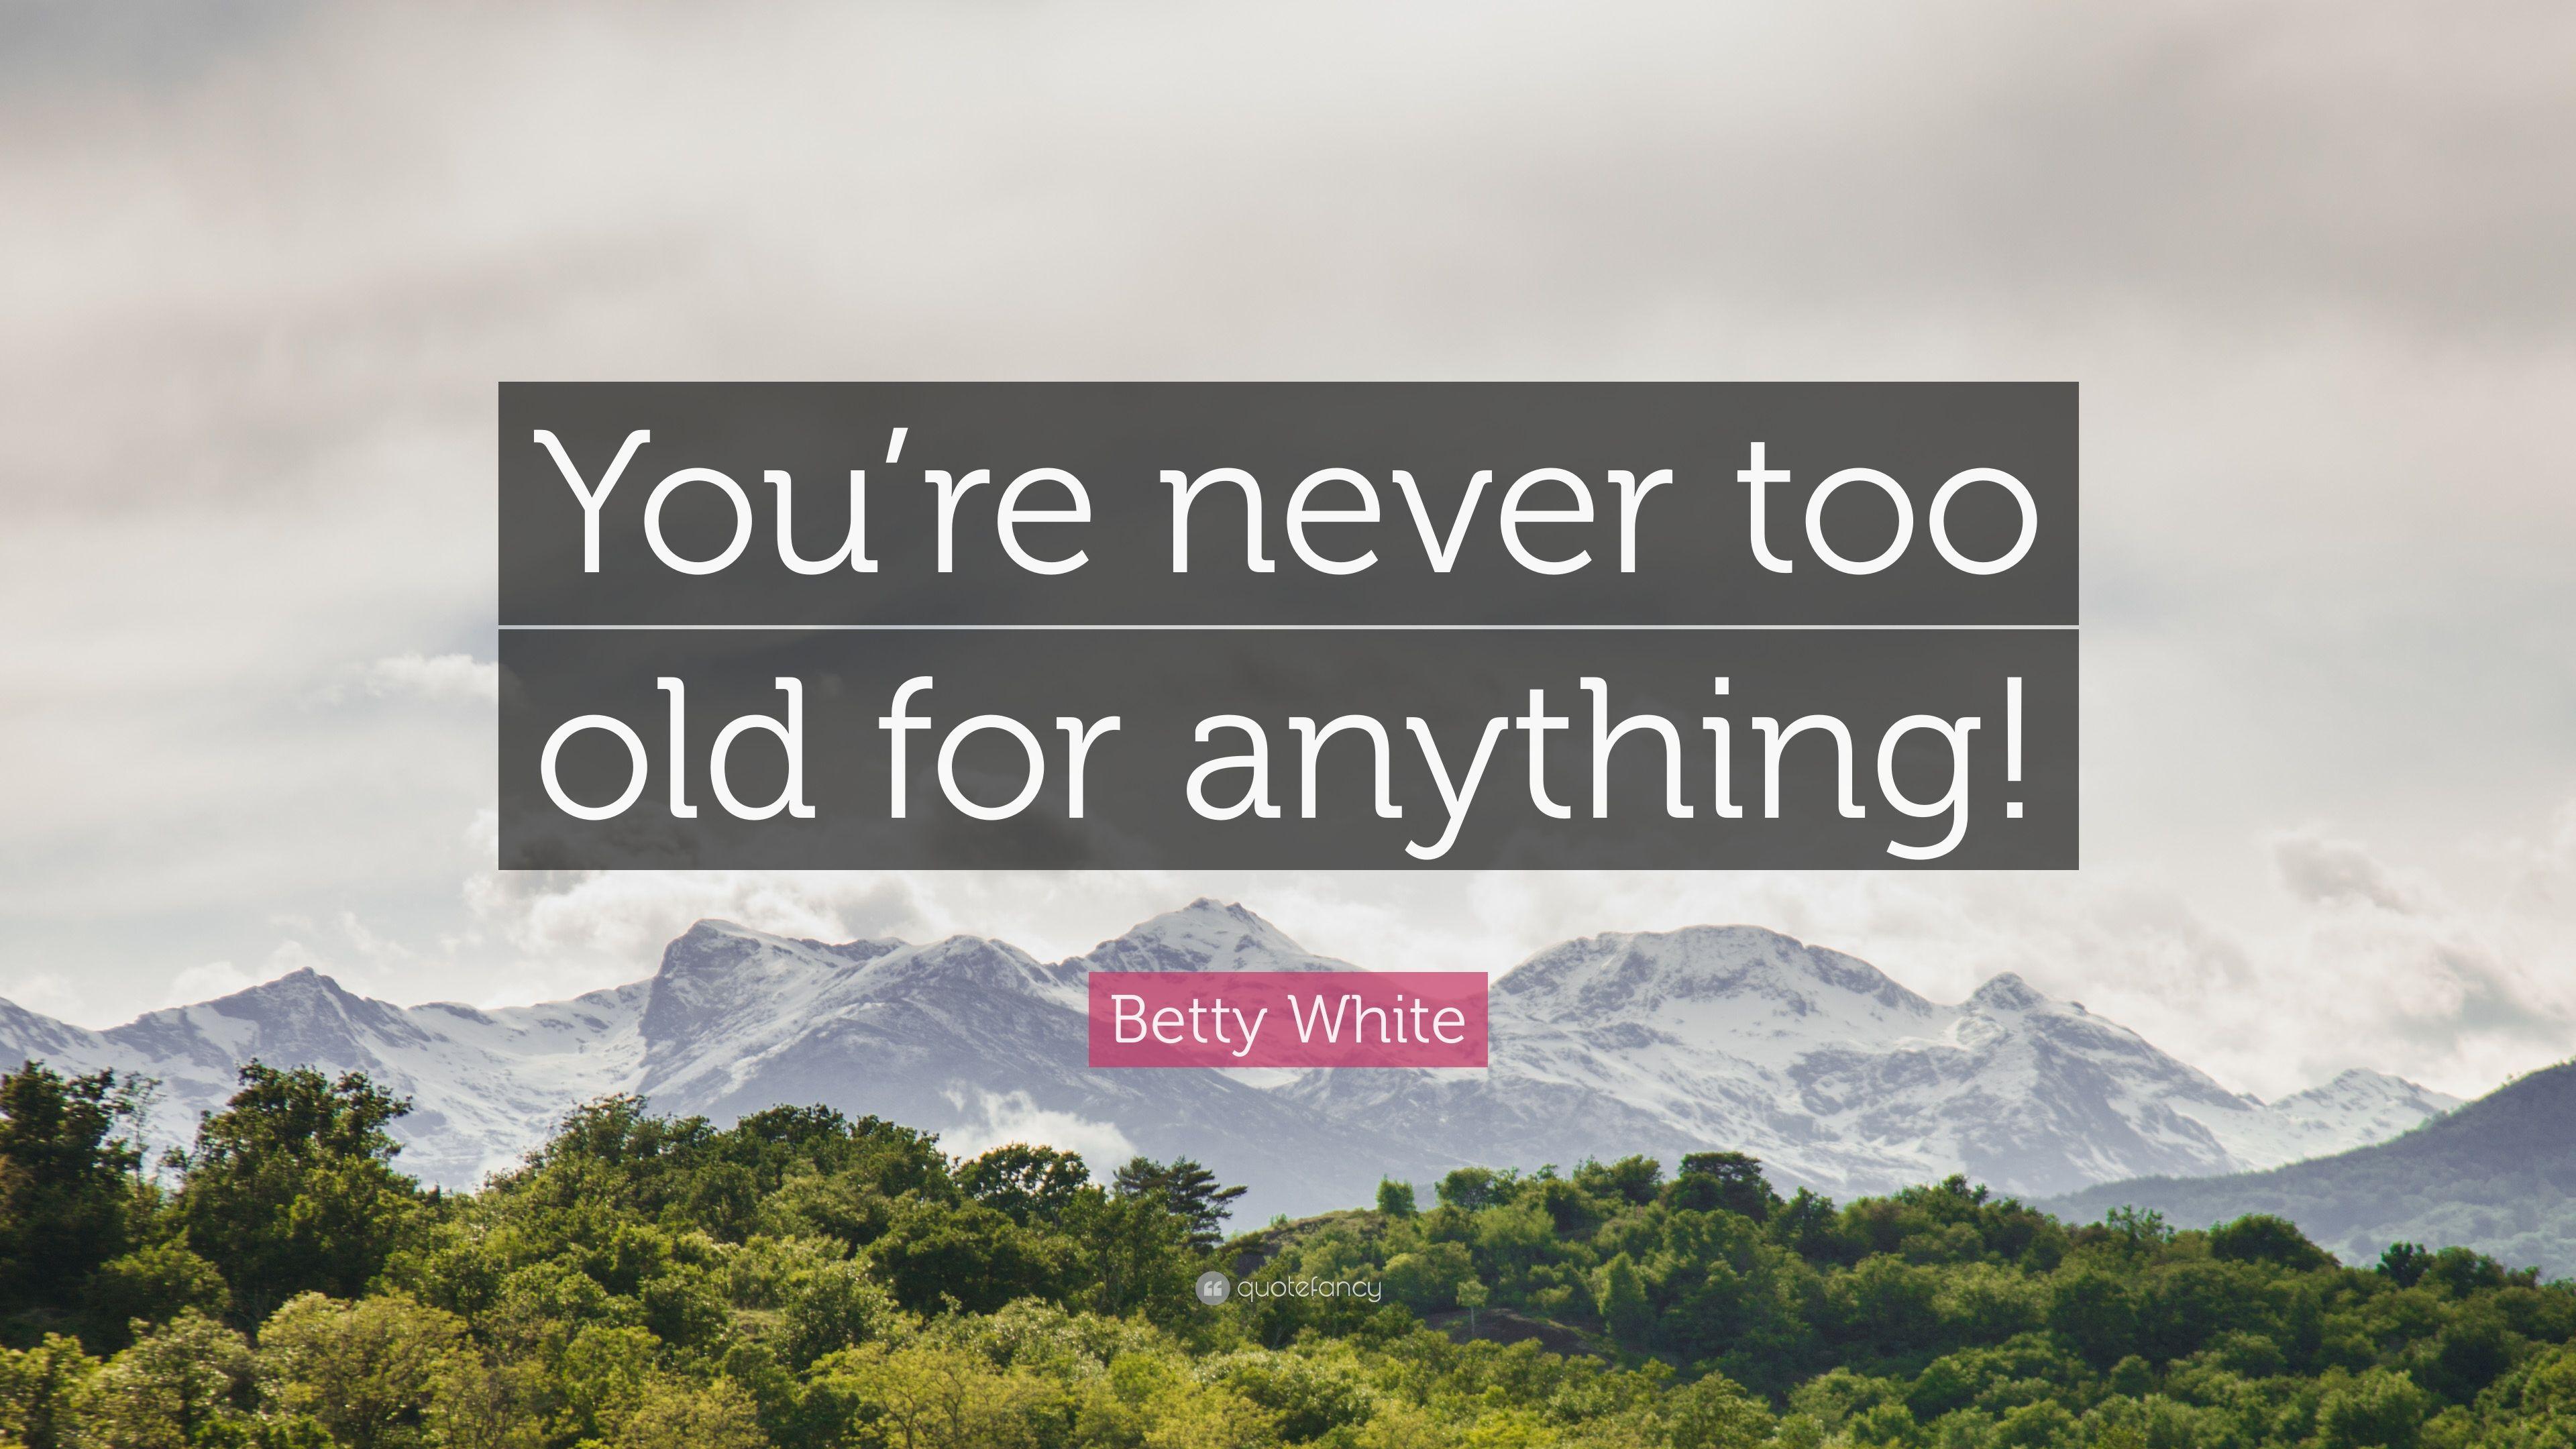 Betty White Quote: “You're never too old for anything!” 10